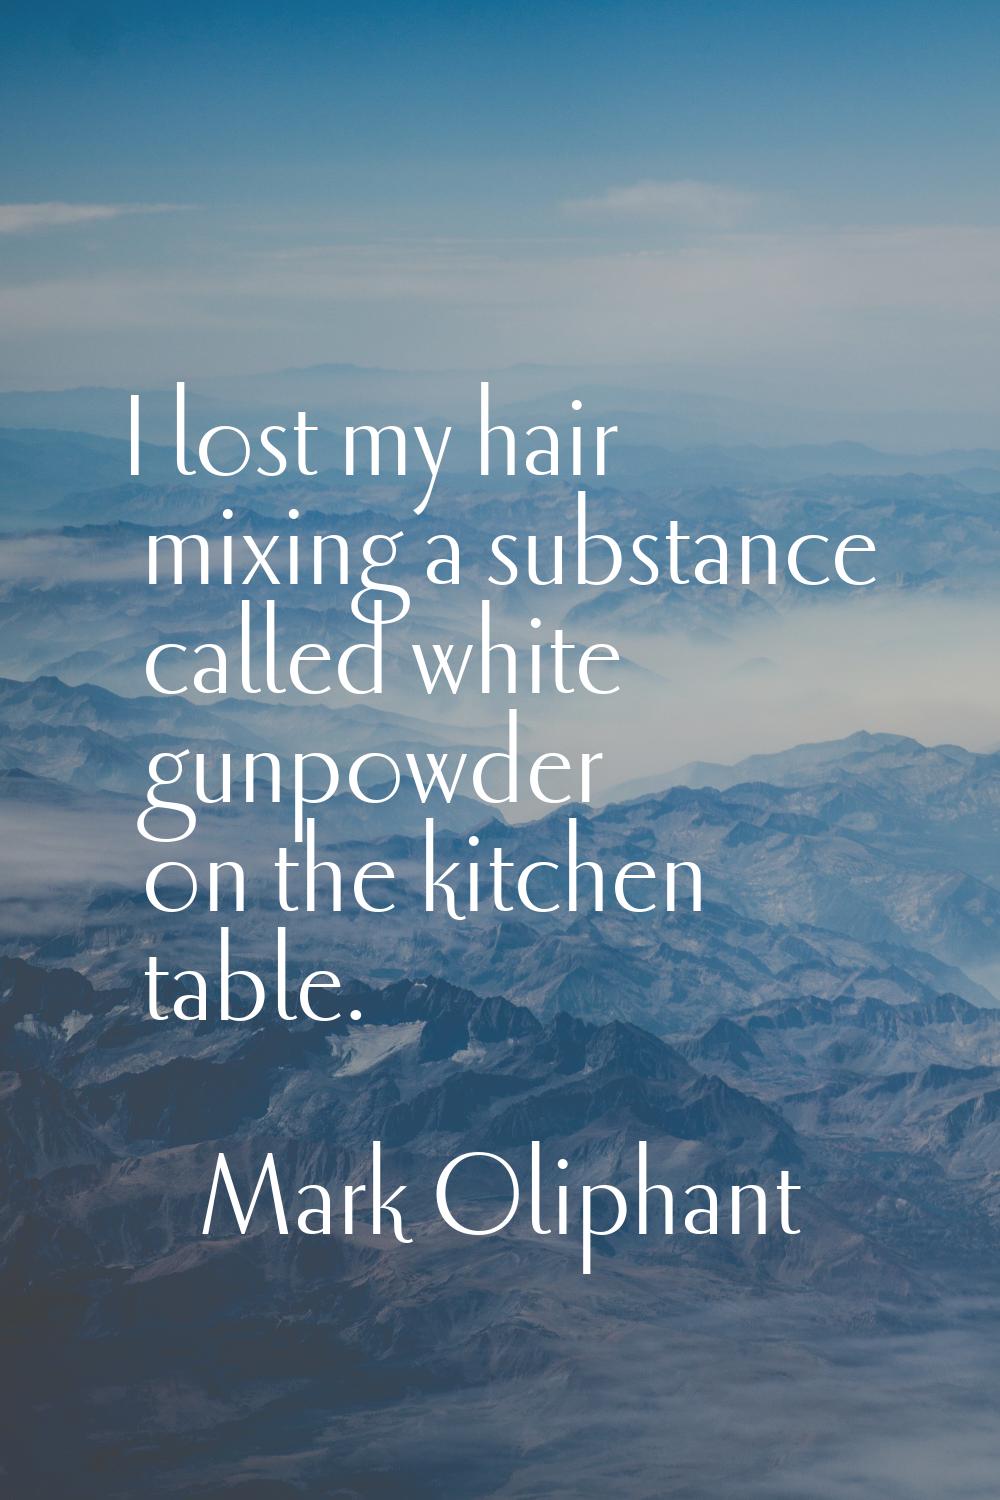 I lost my hair mixing a substance called white gunpowder on the kitchen table.